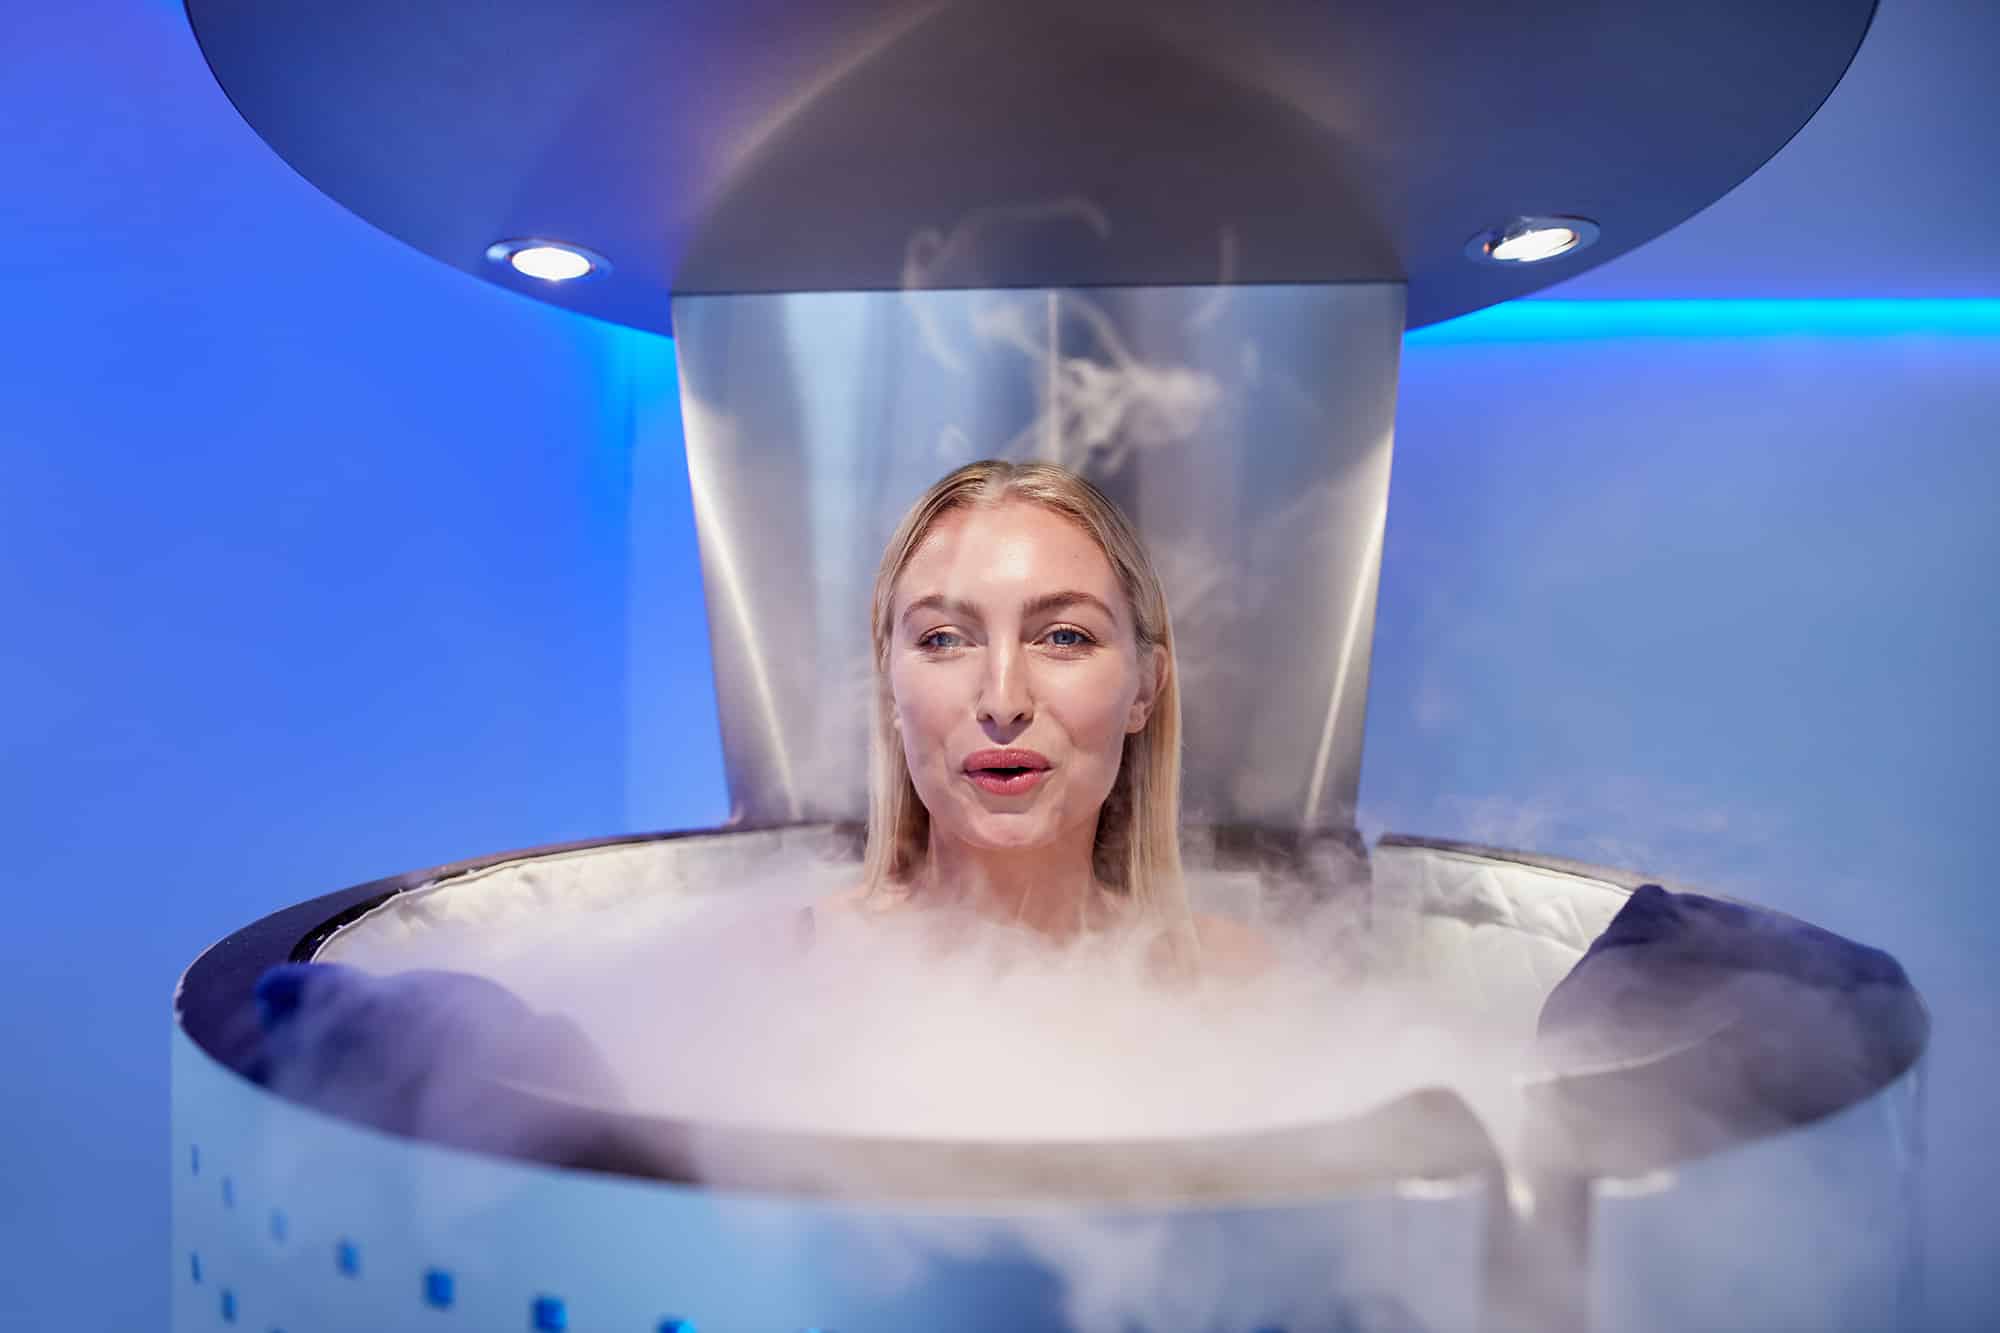 https://chicagohealthonline.com/wp-content/uploads/2021/10/Cryotherapy.jpg